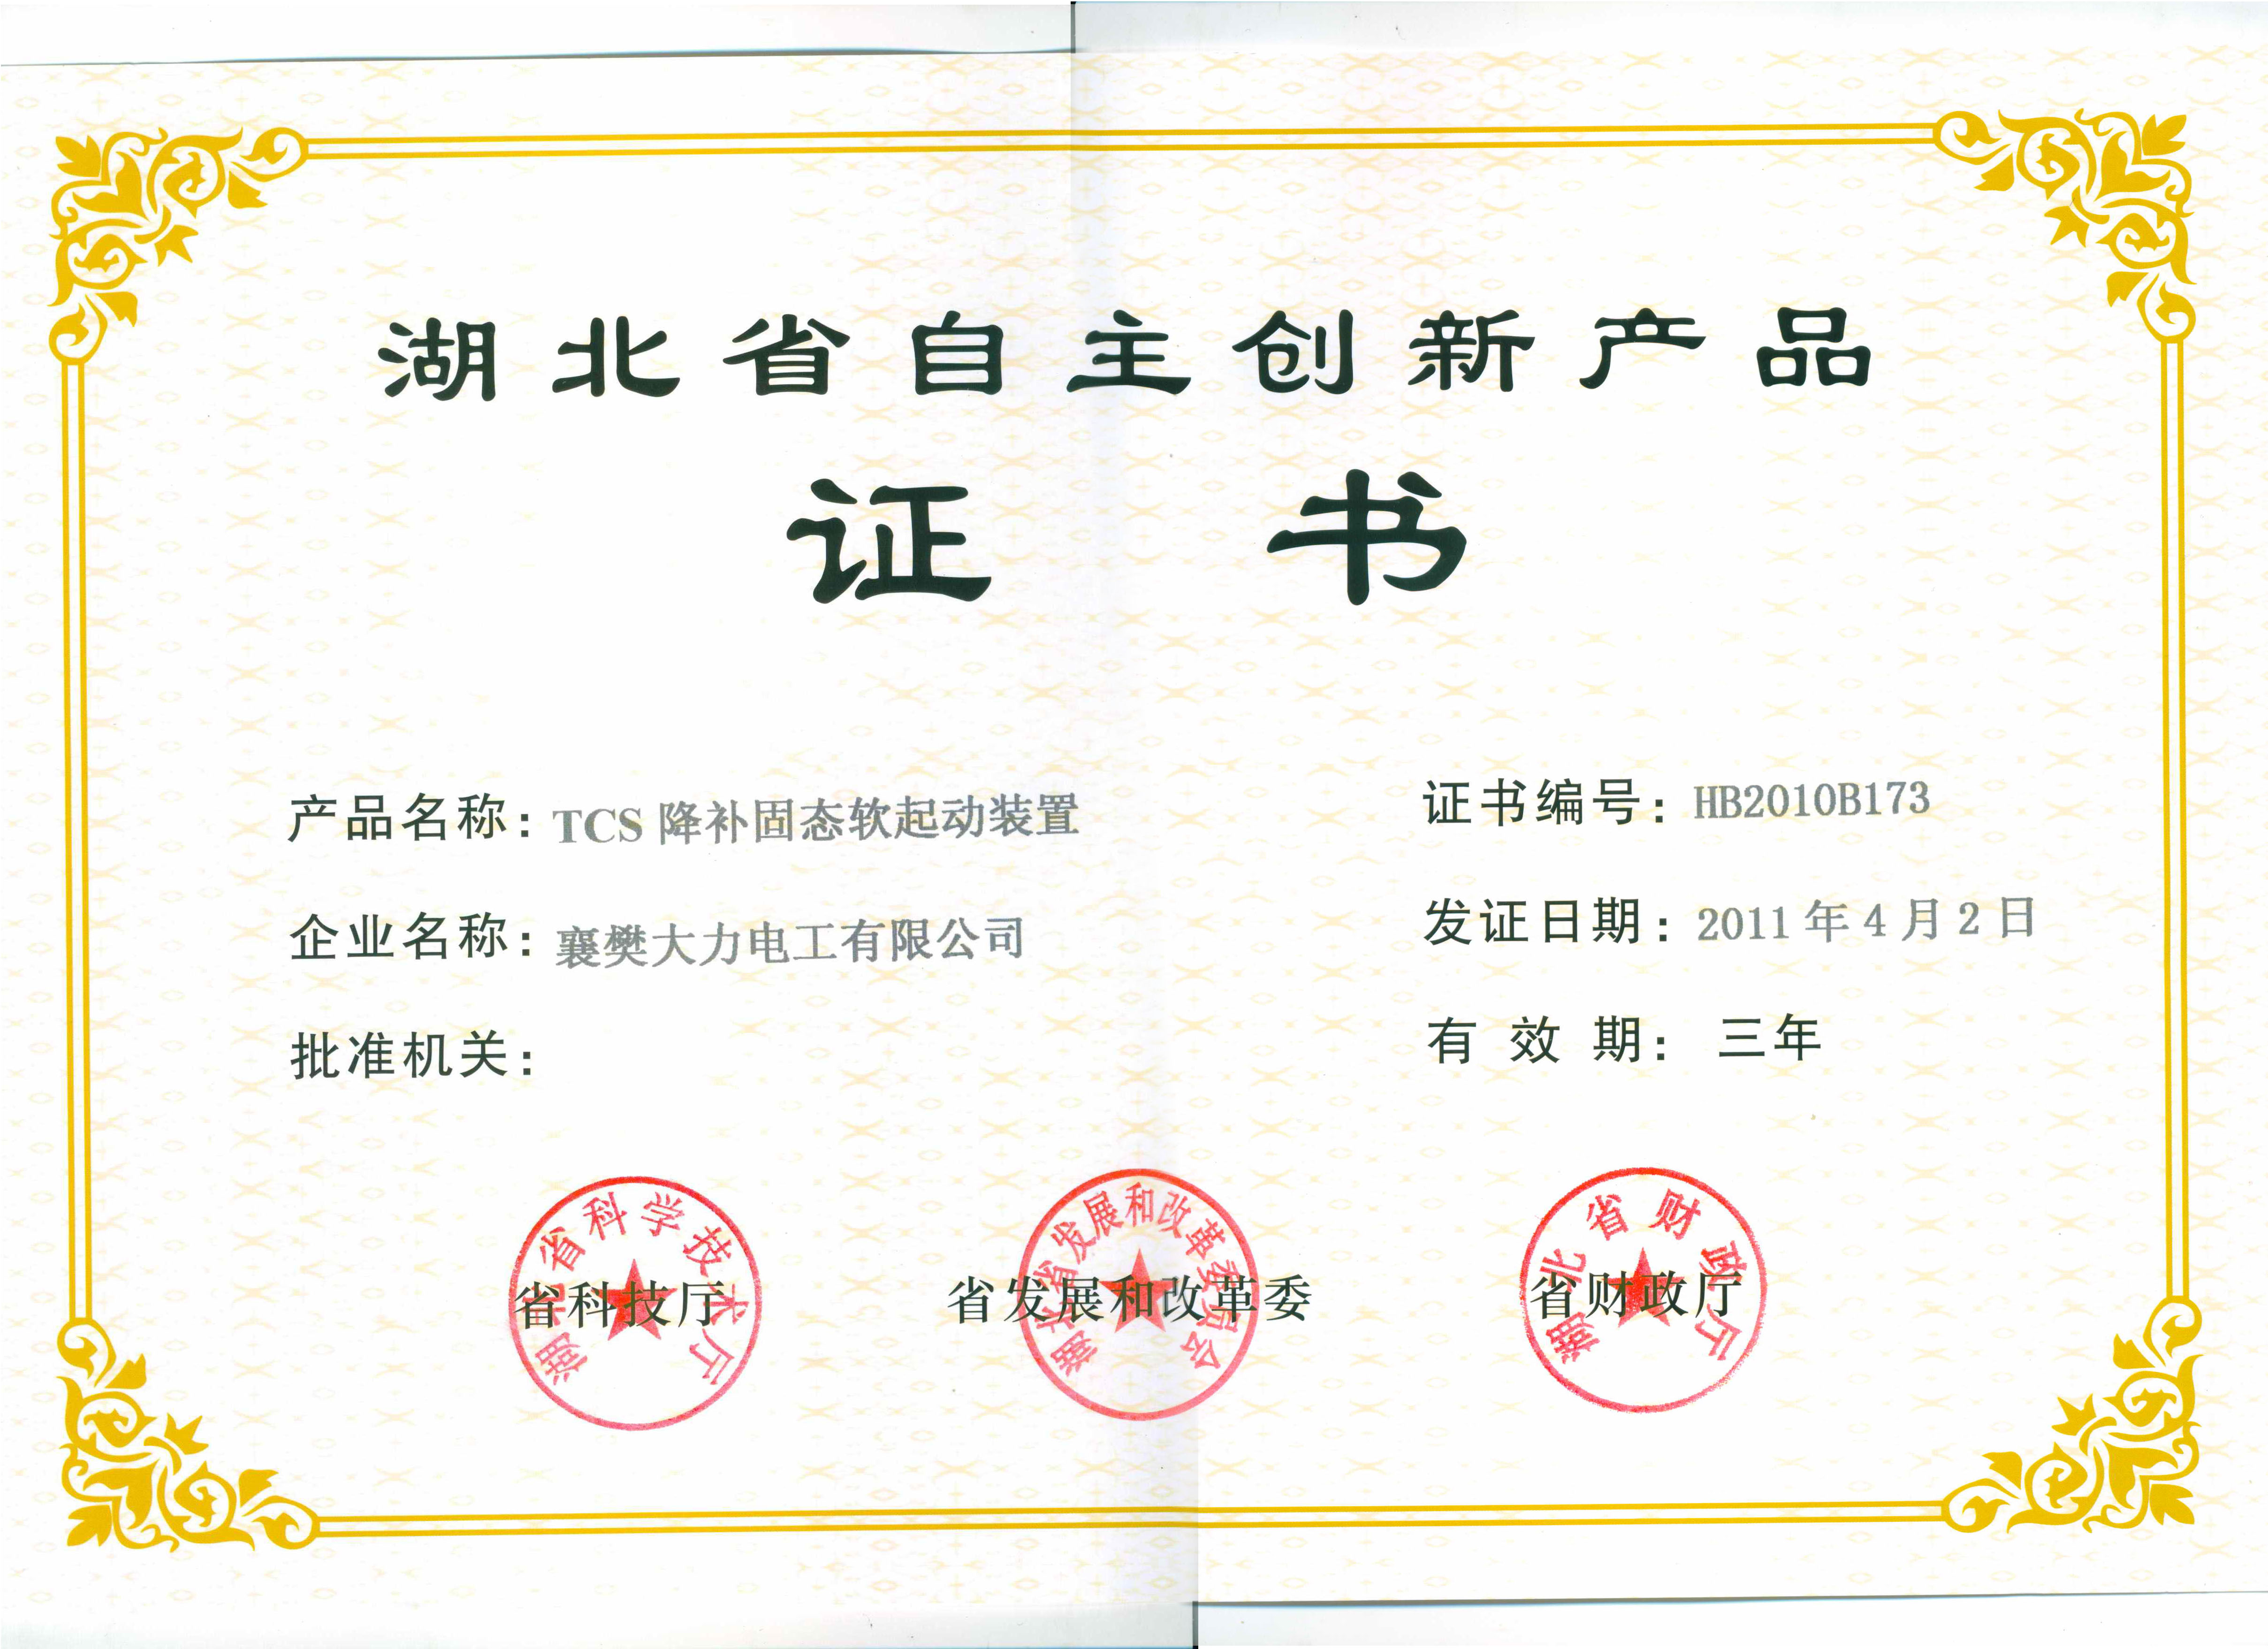 Certification of Hubei Province innovative product